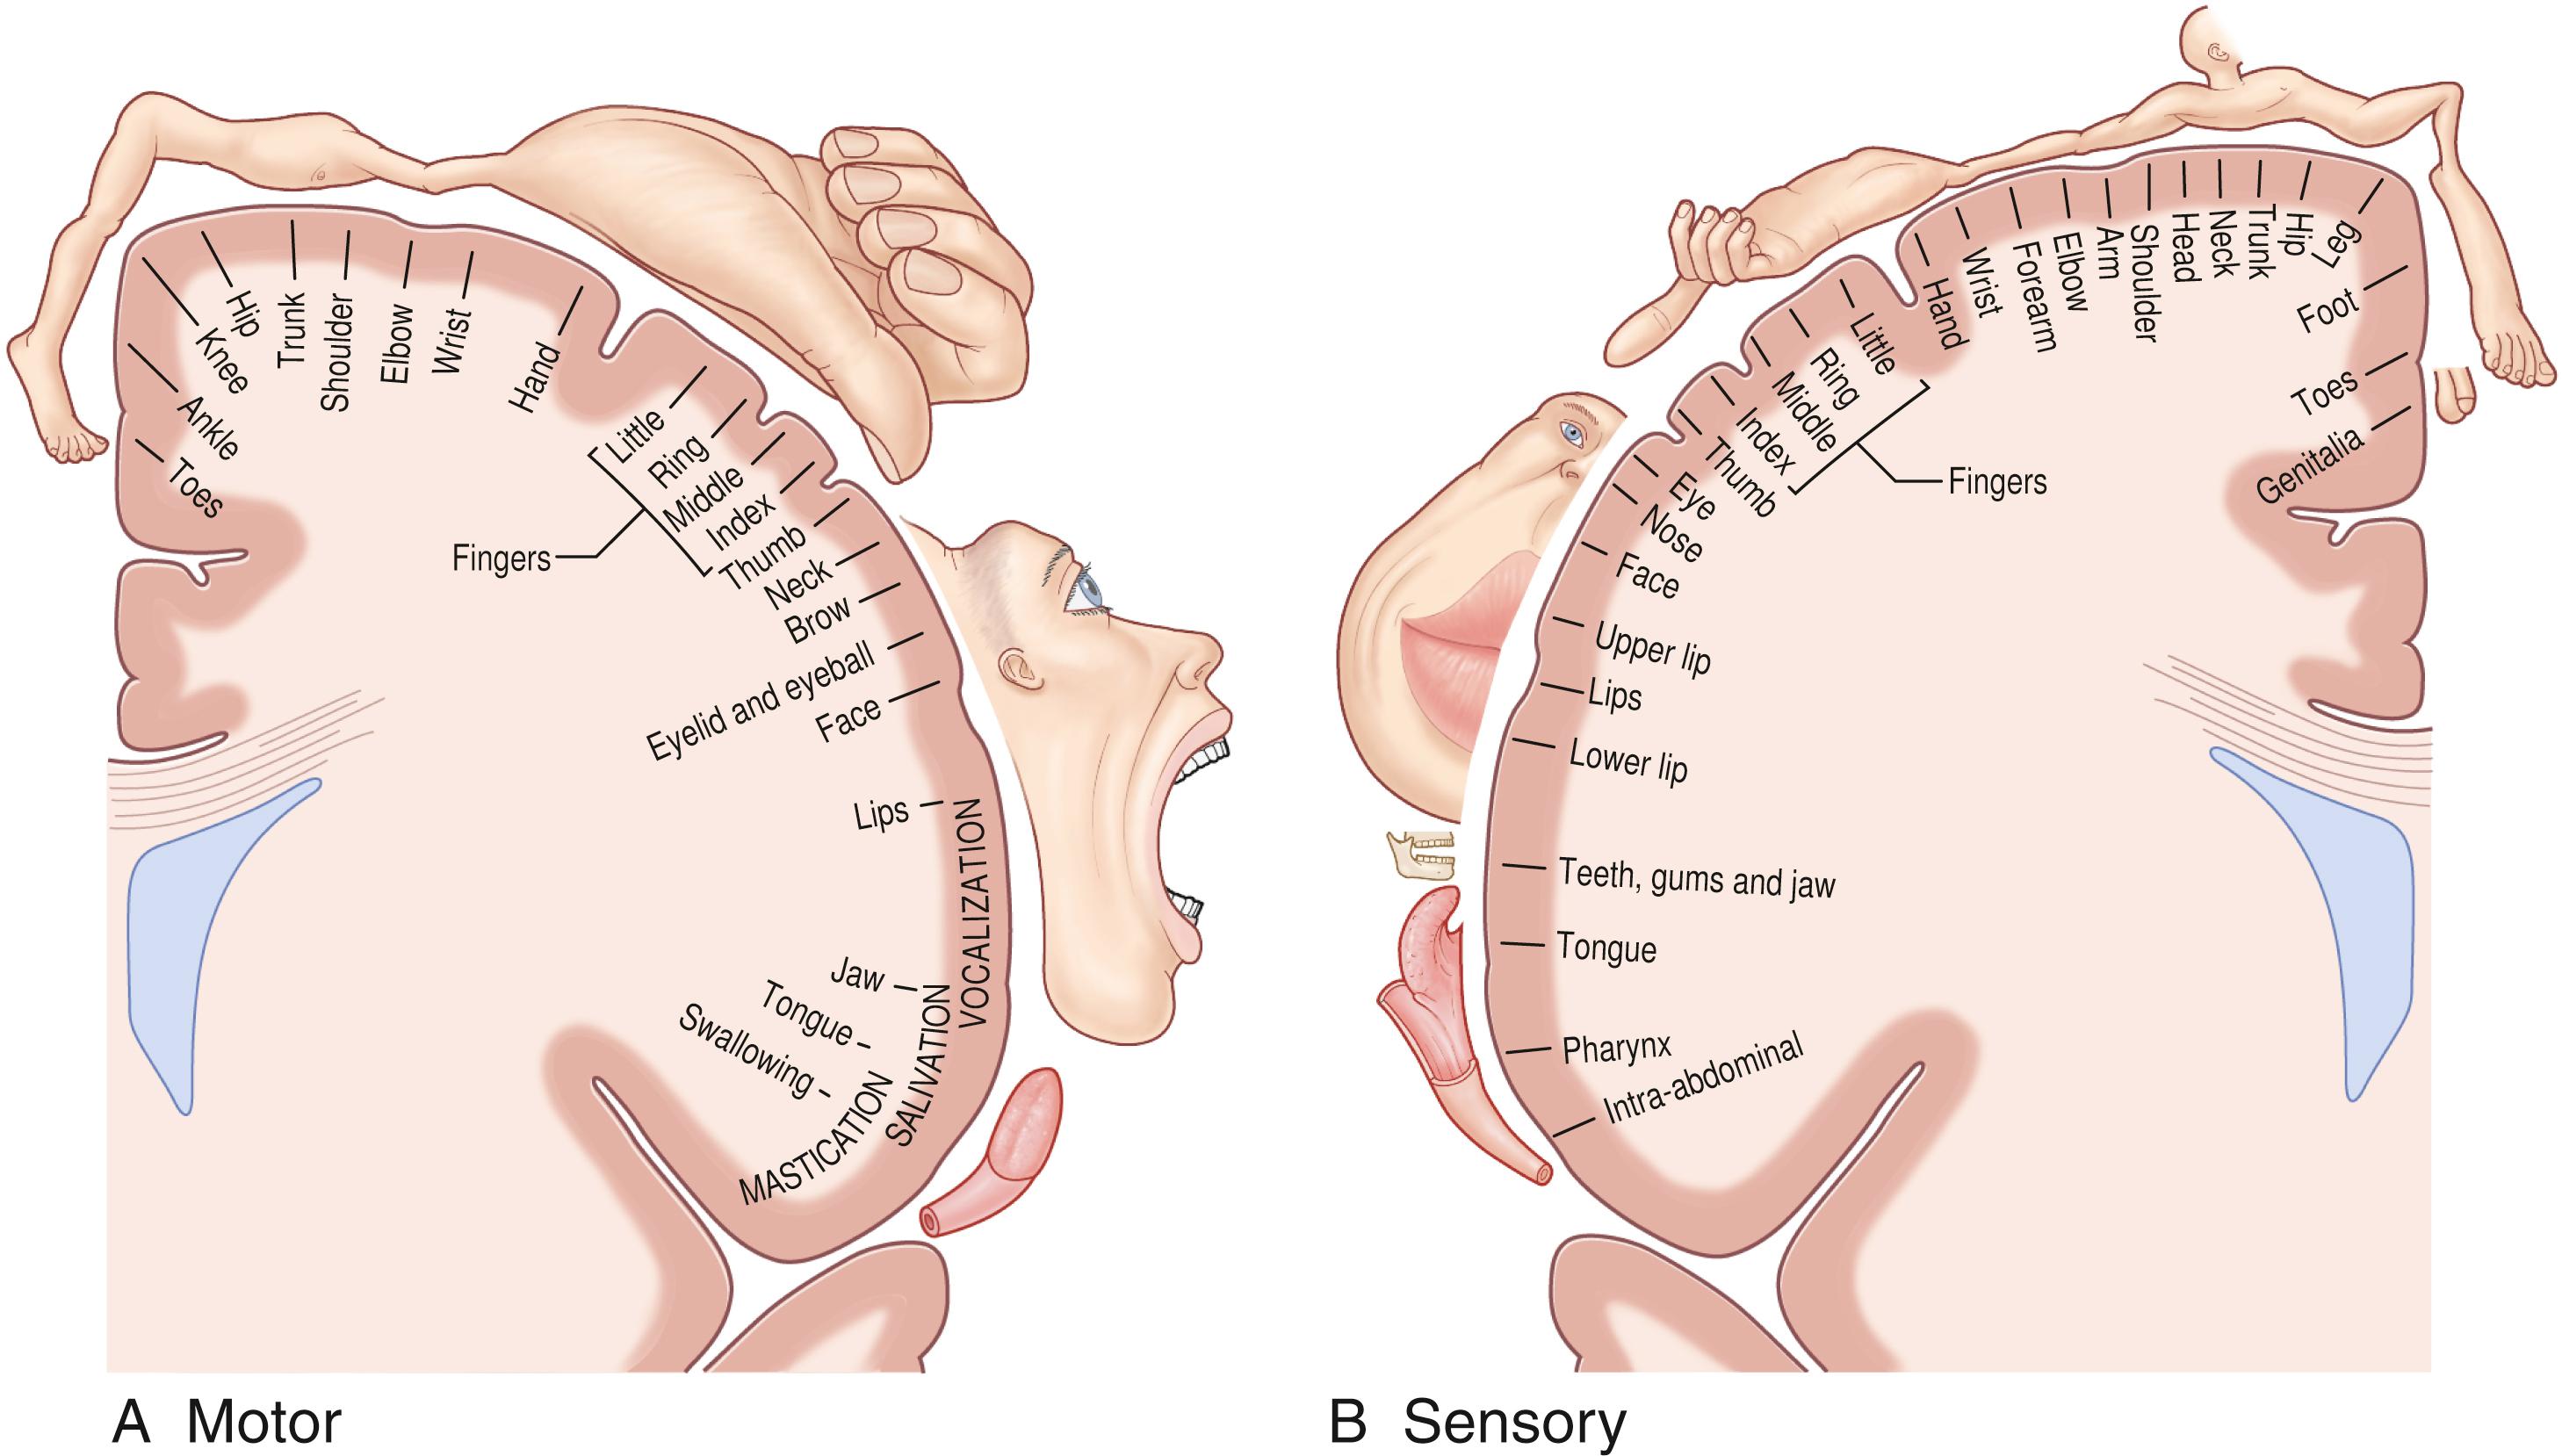 Fig. 37.6, The topographic organization of the primary somatic sensory (A) and motor (B) areas of the cortex. The relative size of each body area represented within the homunculus is indicative of the amount of cortical tissue dedicated to processing sensory (A) or motor (B) information for that body area.